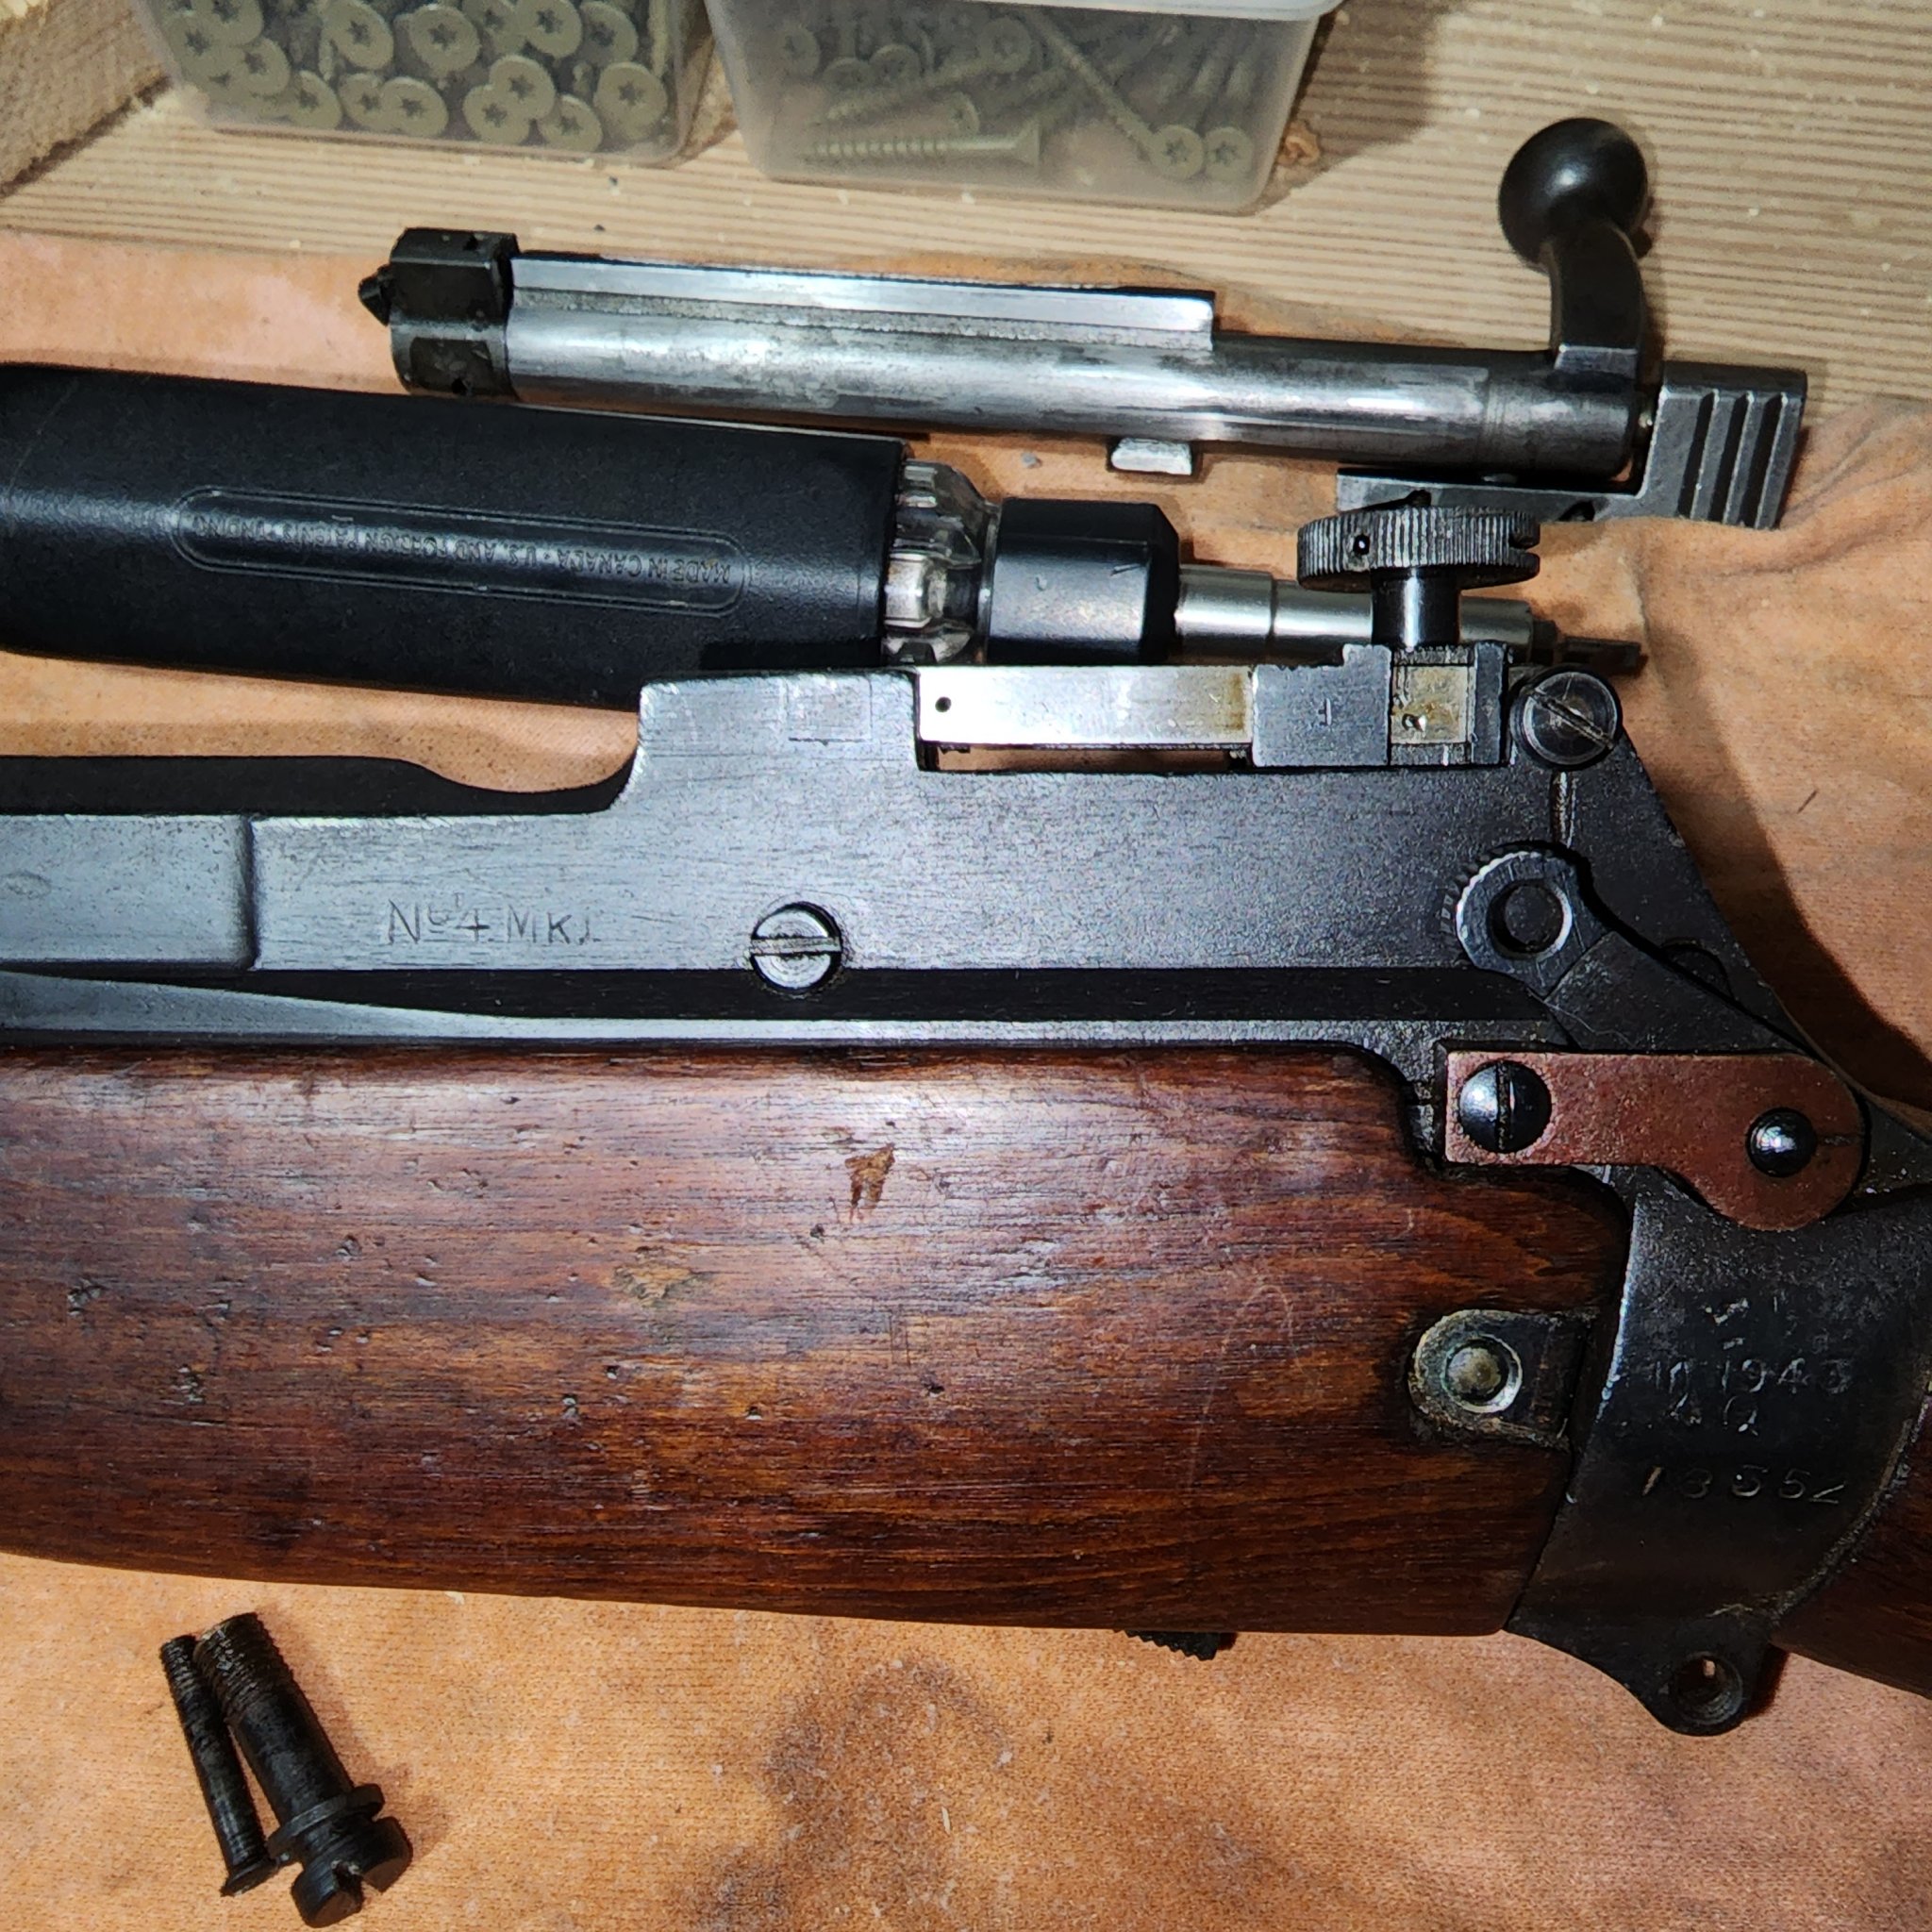 Lee-enfield Ww2 No.4 M1 Long Branch - For Sale 